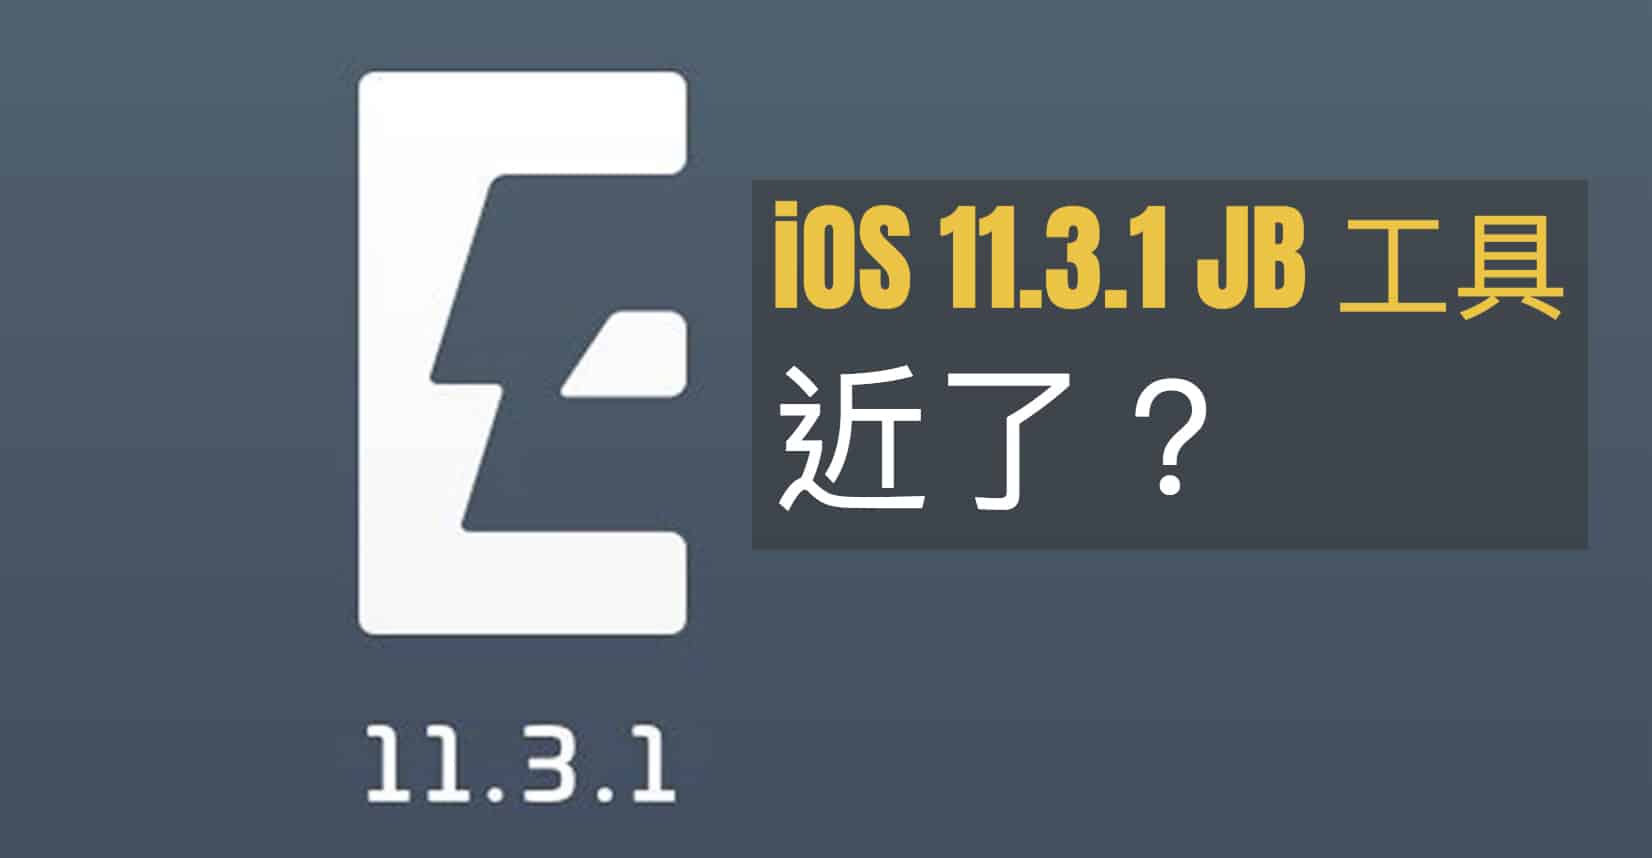 ios 11 3 1 jb electra may release within few days 00a